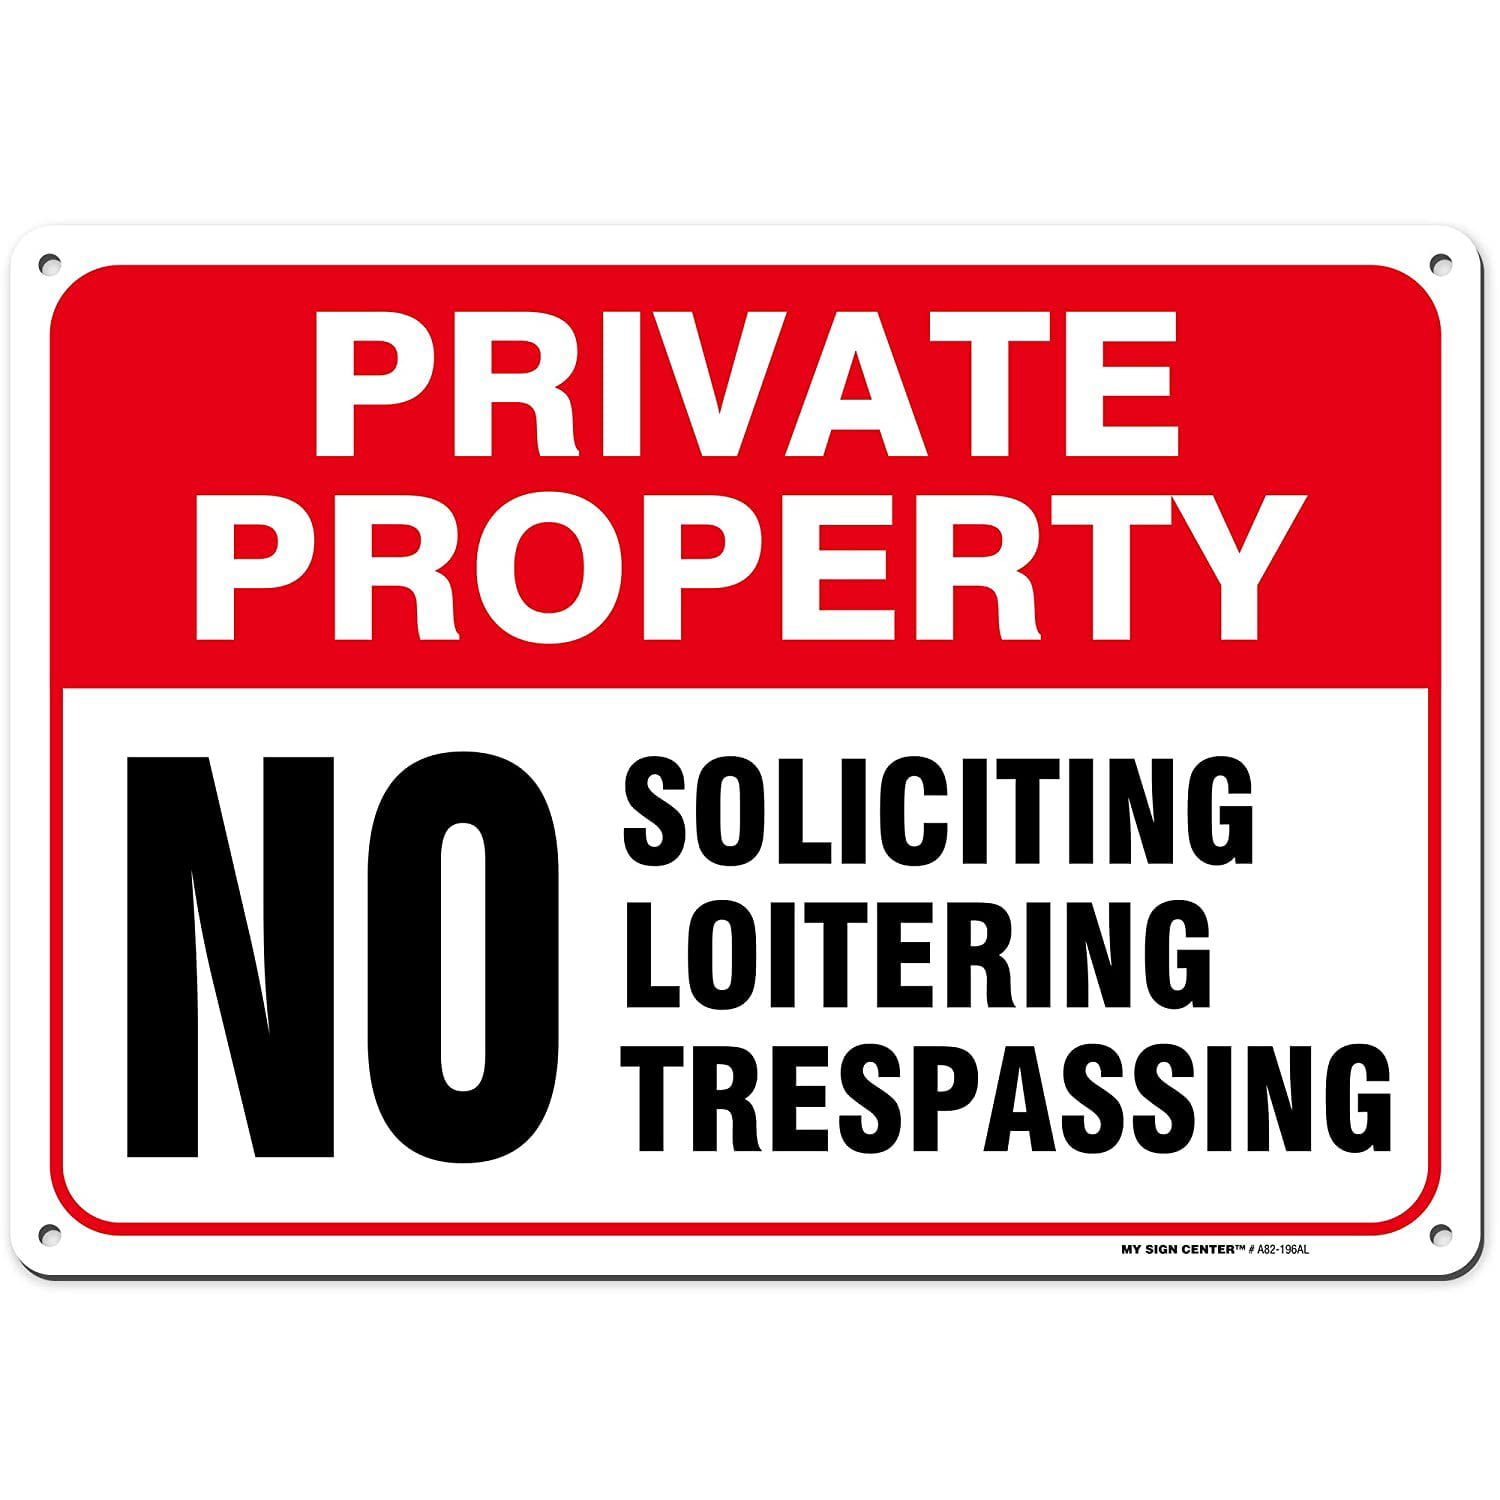 NO TRESPASSING PRIVATE PROPERTY 9 X 14 TIN METAL SIGN KEEP OUT  9 X 12 PLASTIC 